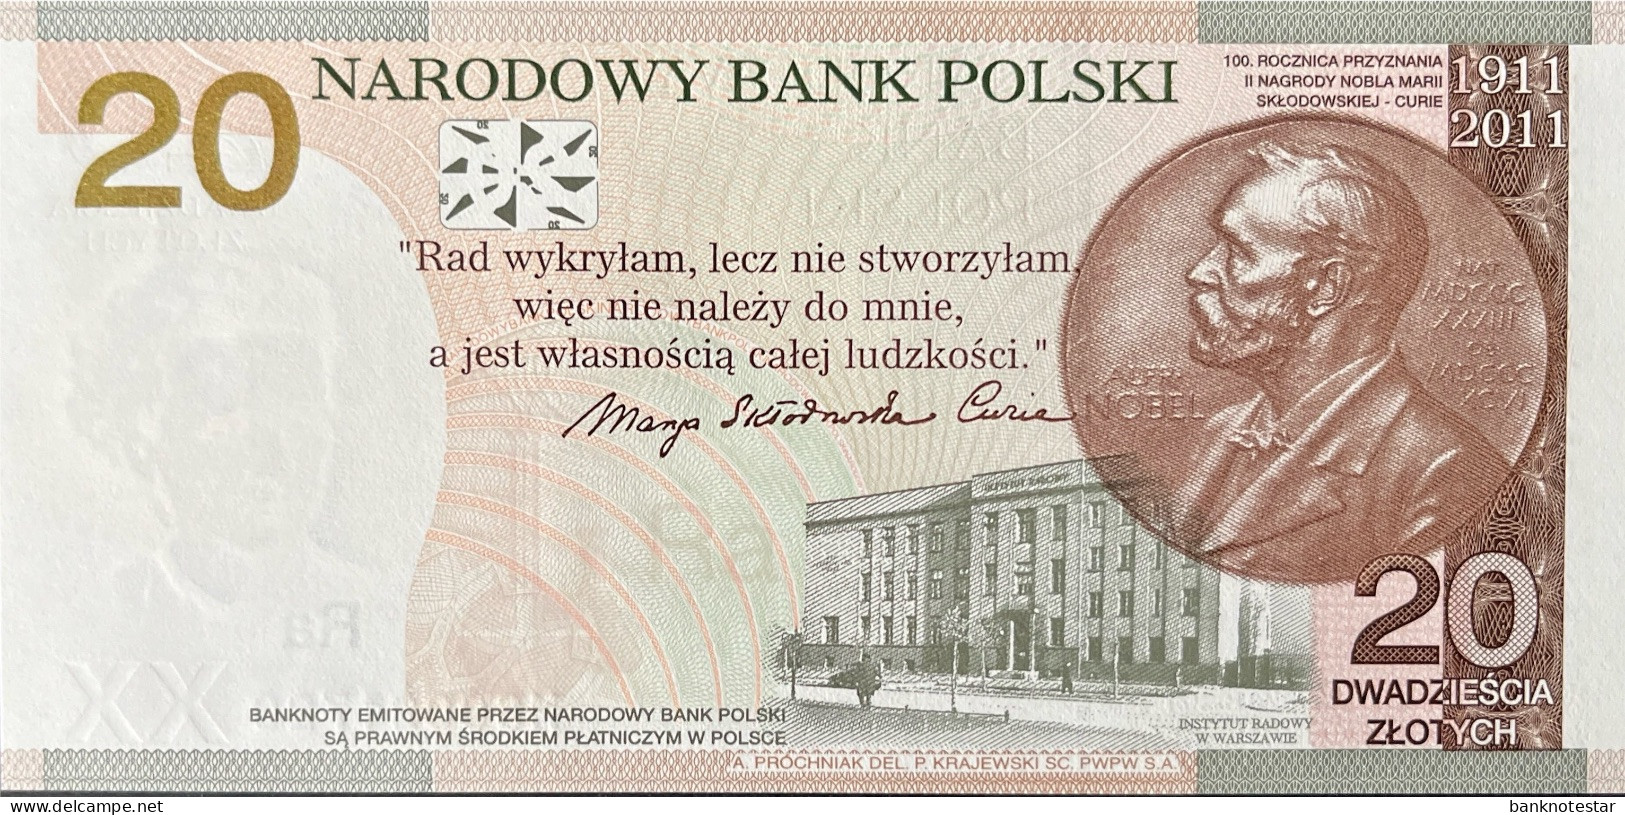 Poland 20 Zloty, P-A184 (20.4.2011) - UNC - Marie Curie Banknote - Polonia